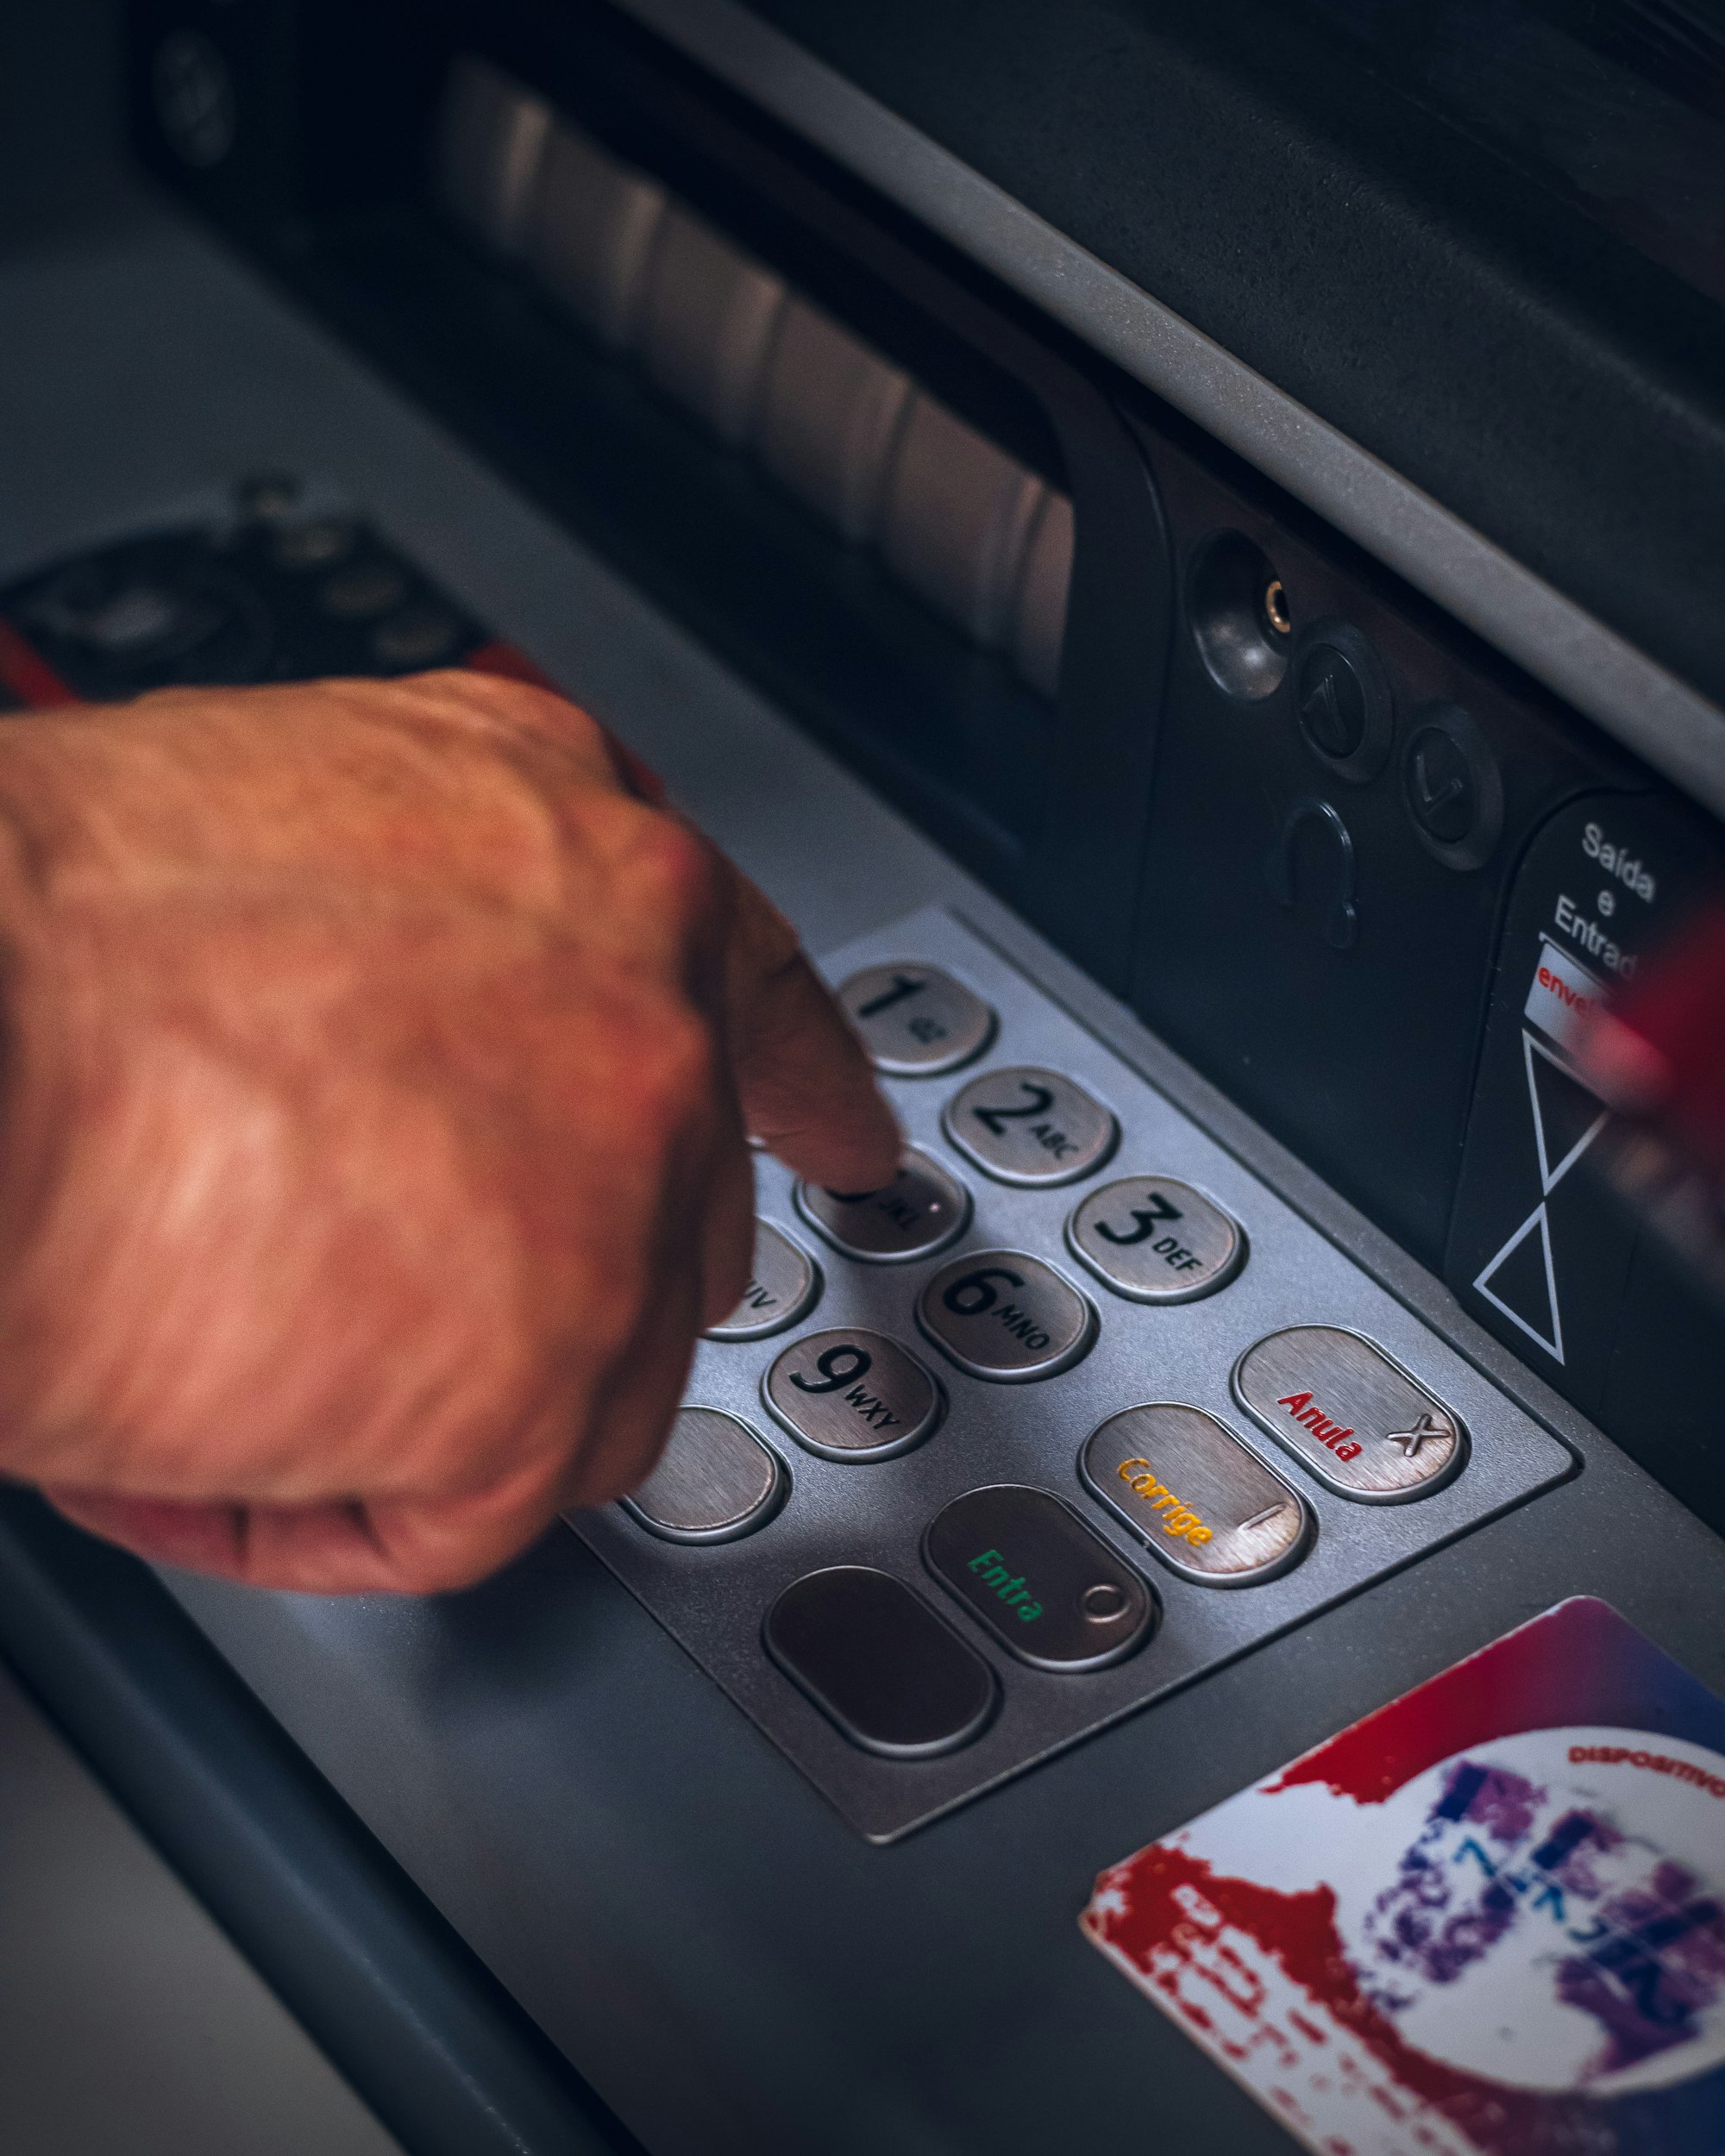 hand - using a ATM - Pressing buttons